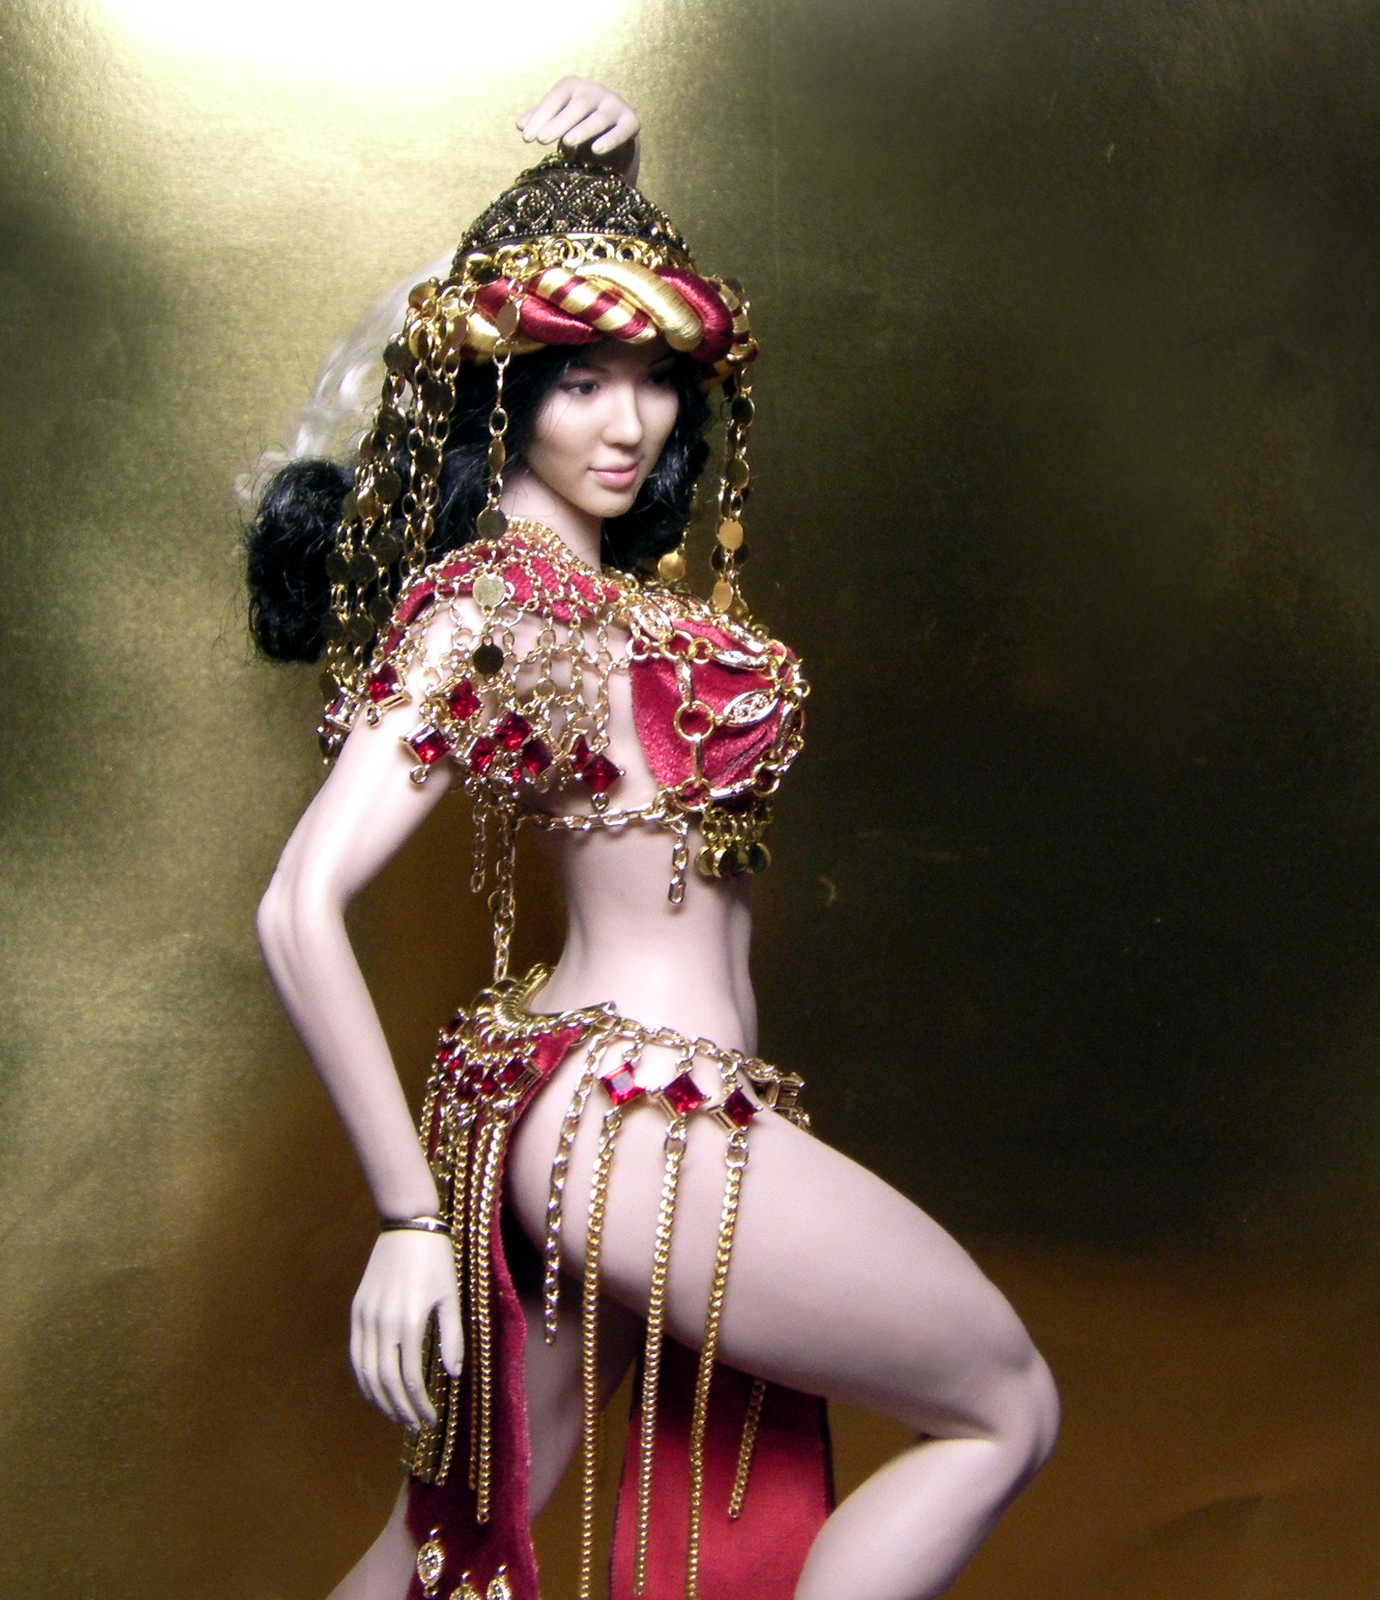 Continuation of the post Harem of the Sultan in Miniature - My, Body, belly dance, Historical costume, Gladiator, Nudity, Topless, Hurrem Sultan, Decoration, Armor, Jointed doll, Phicen, Dollhouse, Reply to post, Longpost, Video, Youtube